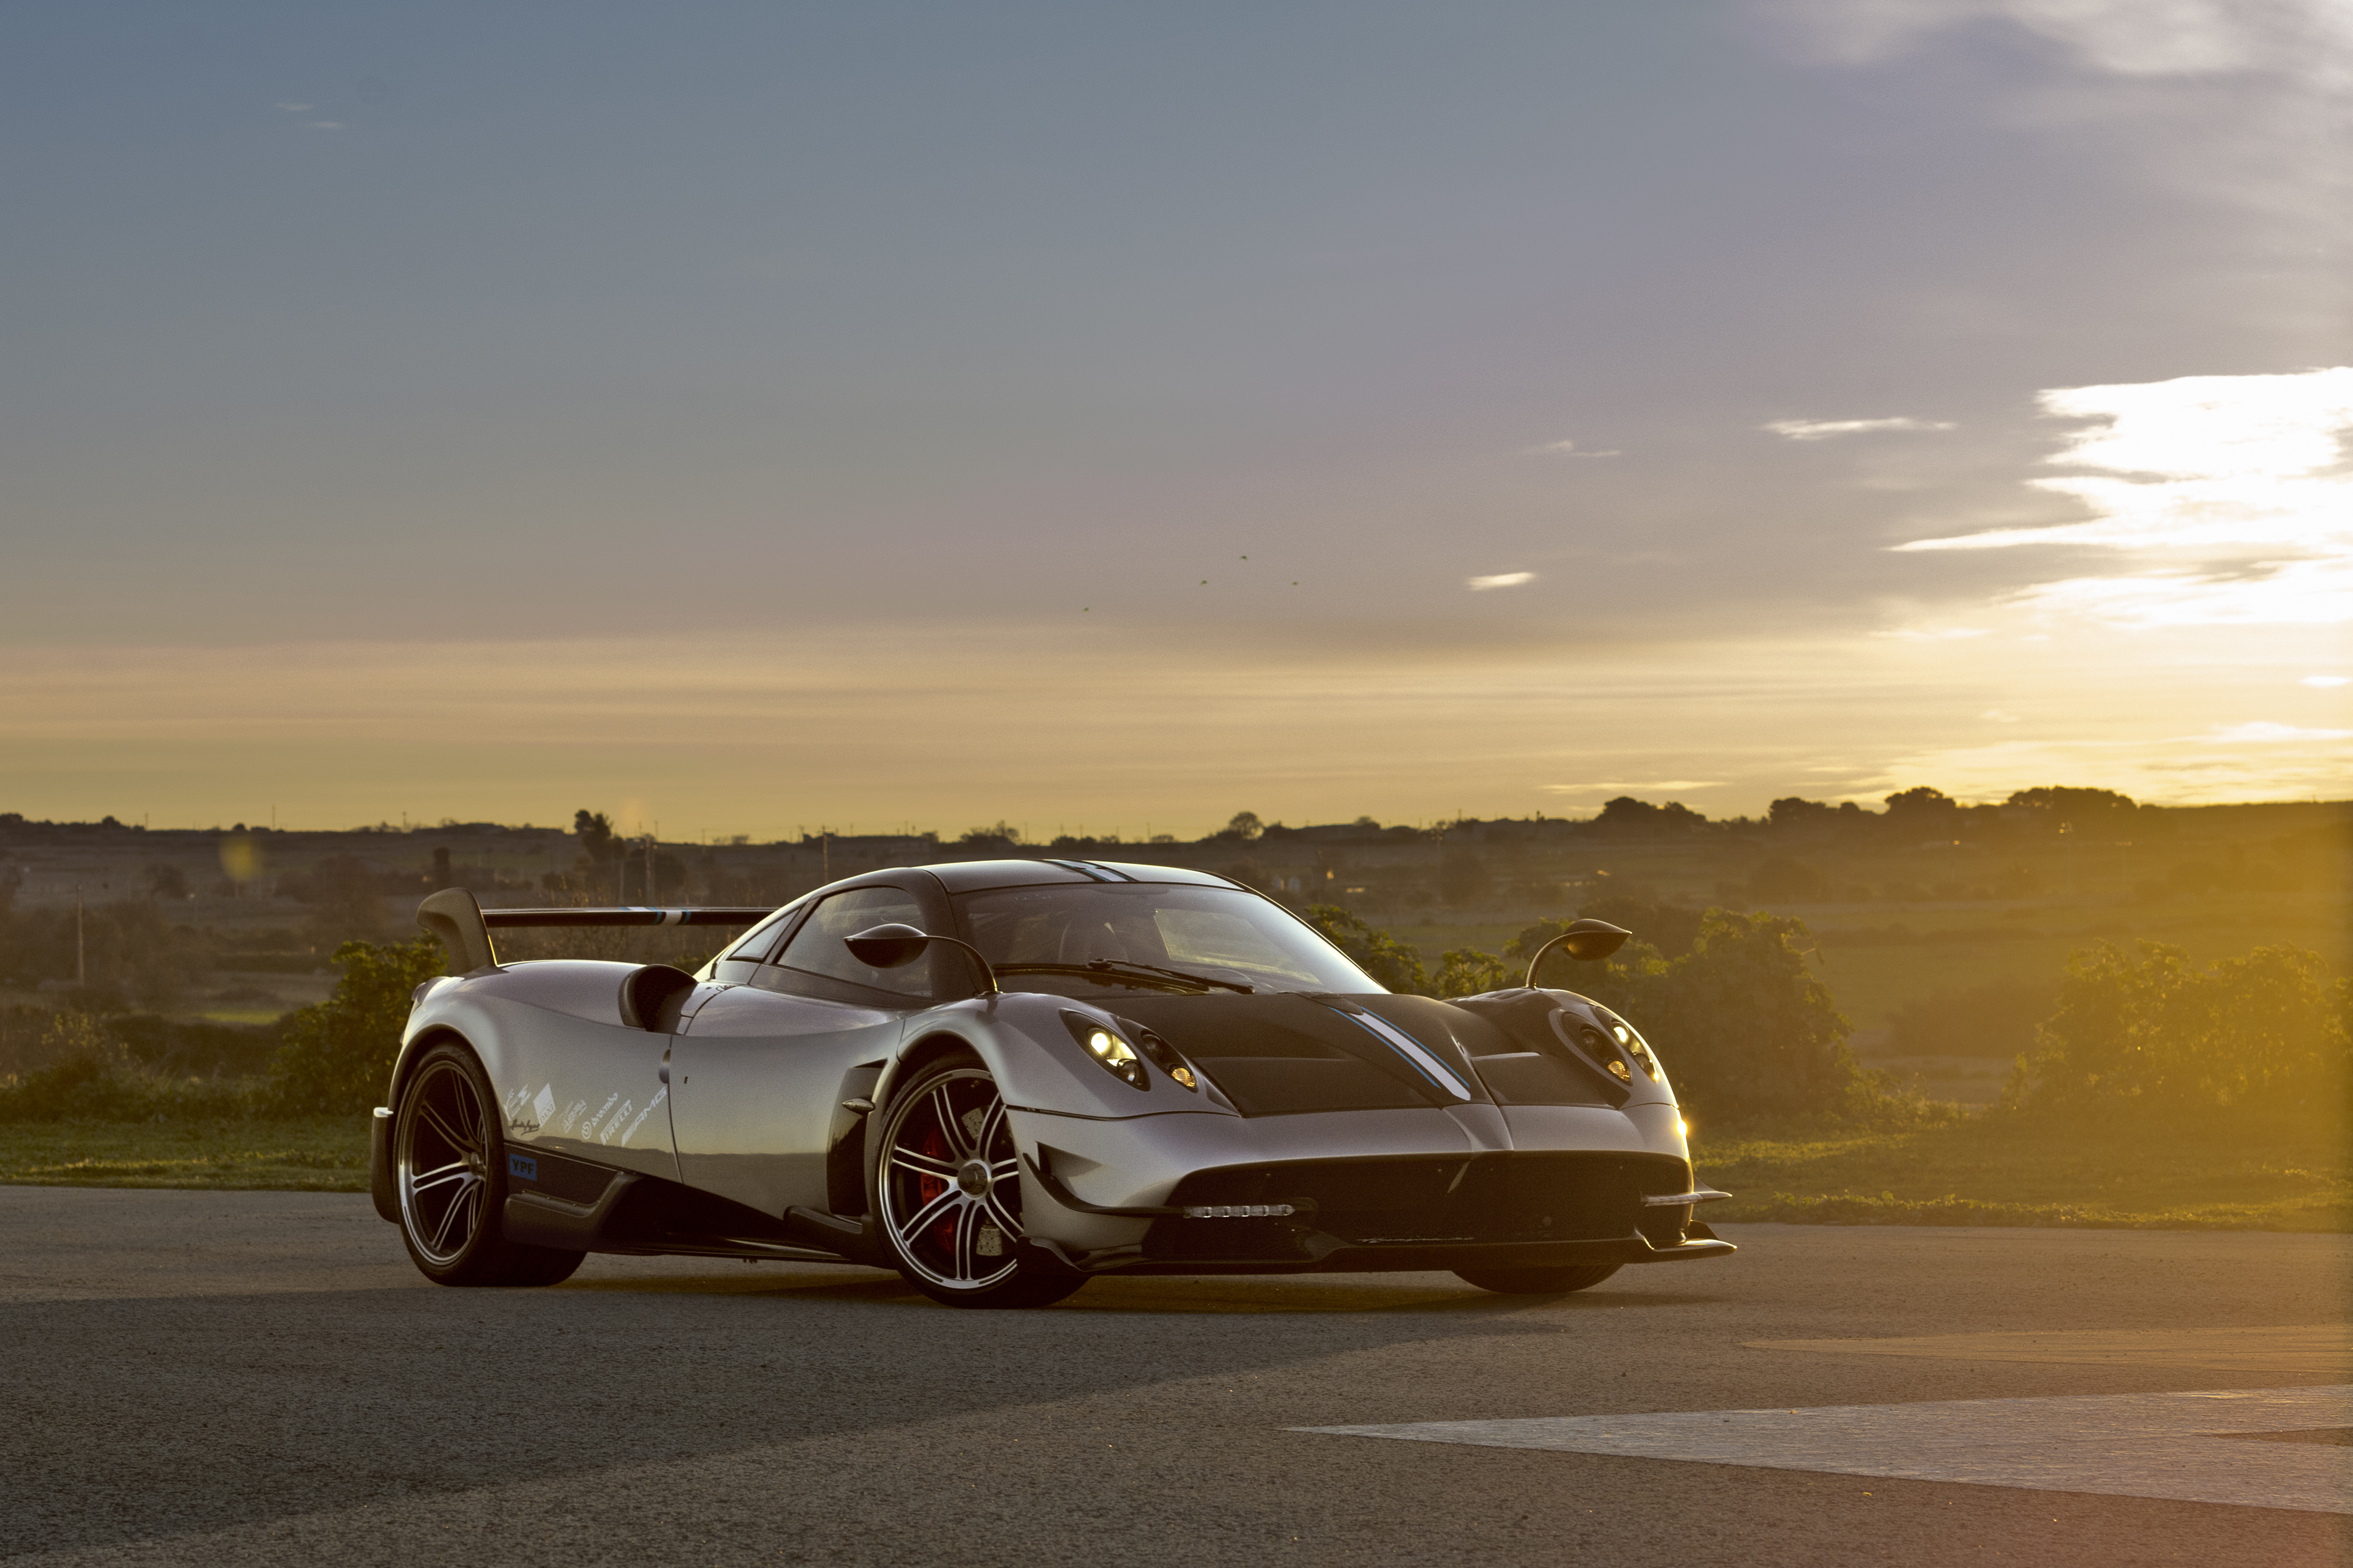 127276 download wallpaper pagani, cars, road, side view, huayra screensavers and pictures for free